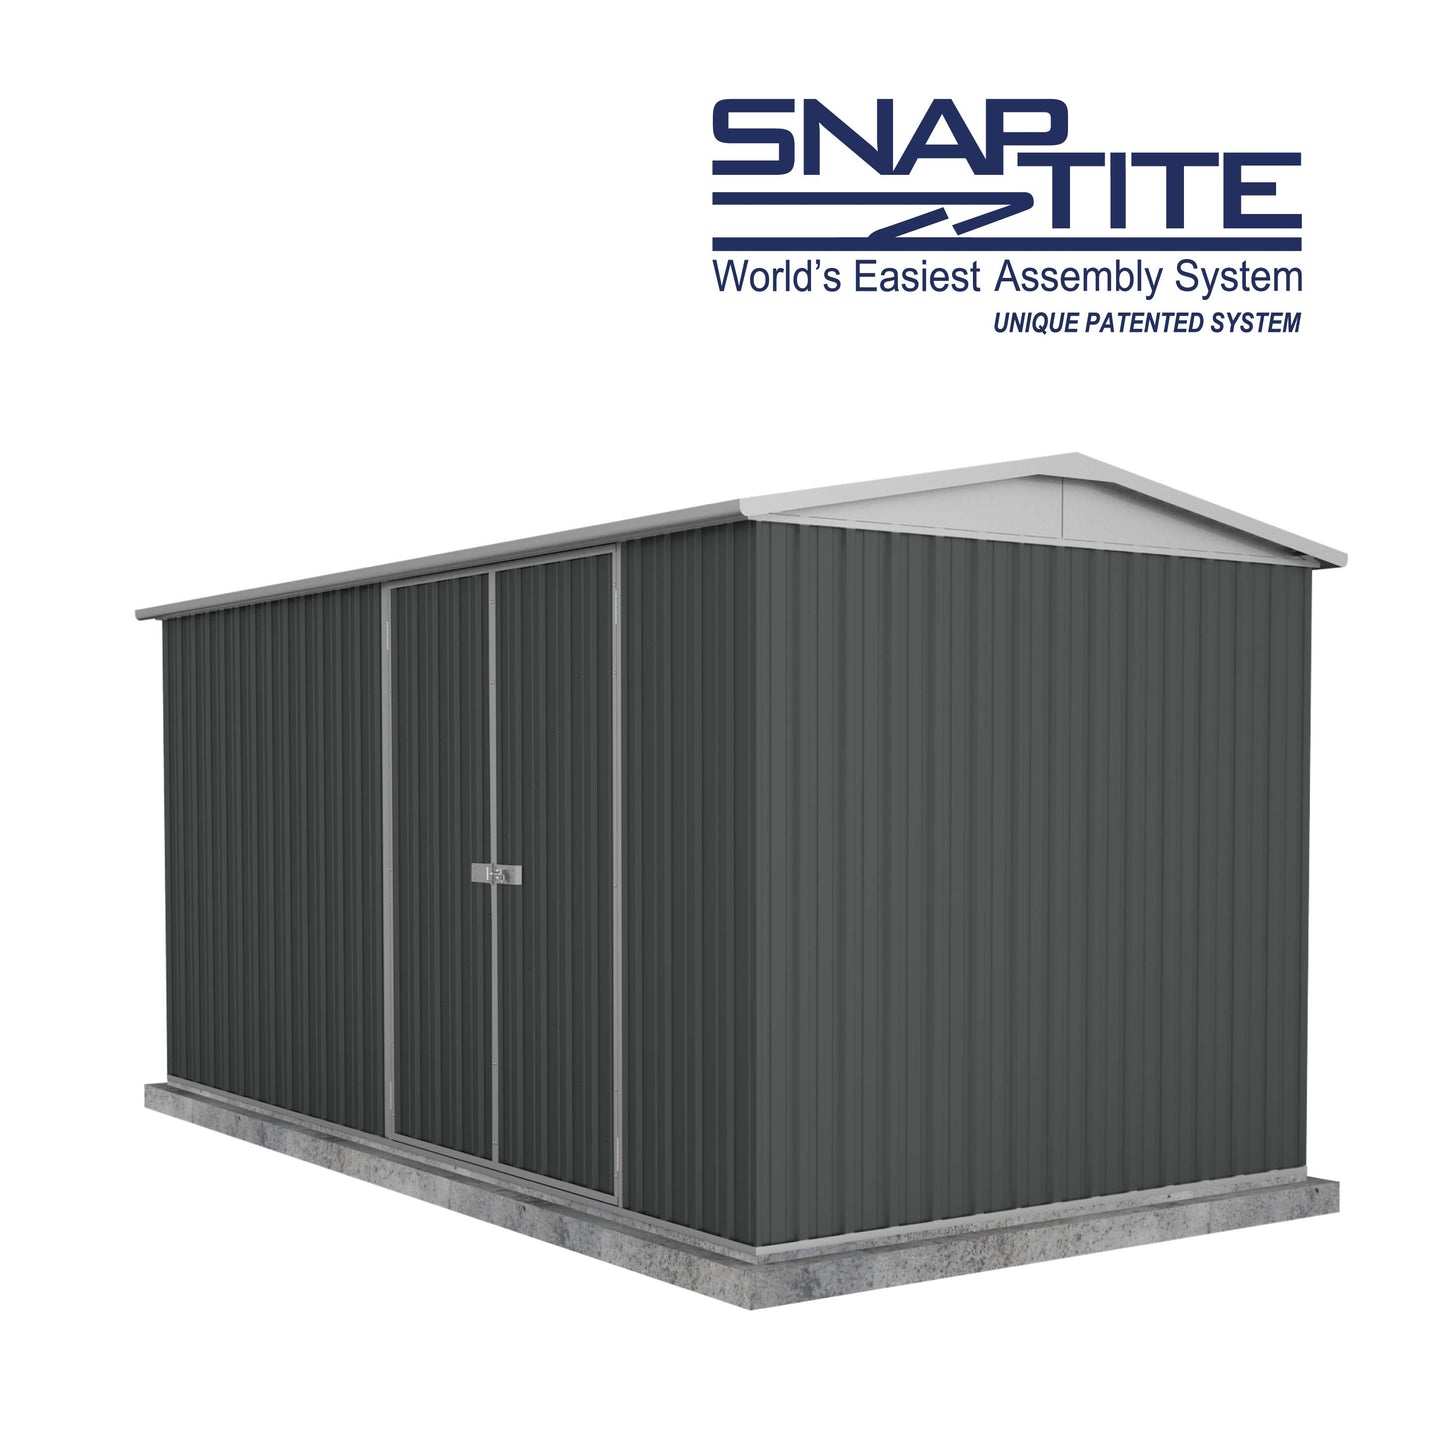 Absco 4.48mW x 2.26mD x 2.00mH Double Door Workshop Shed - Monument